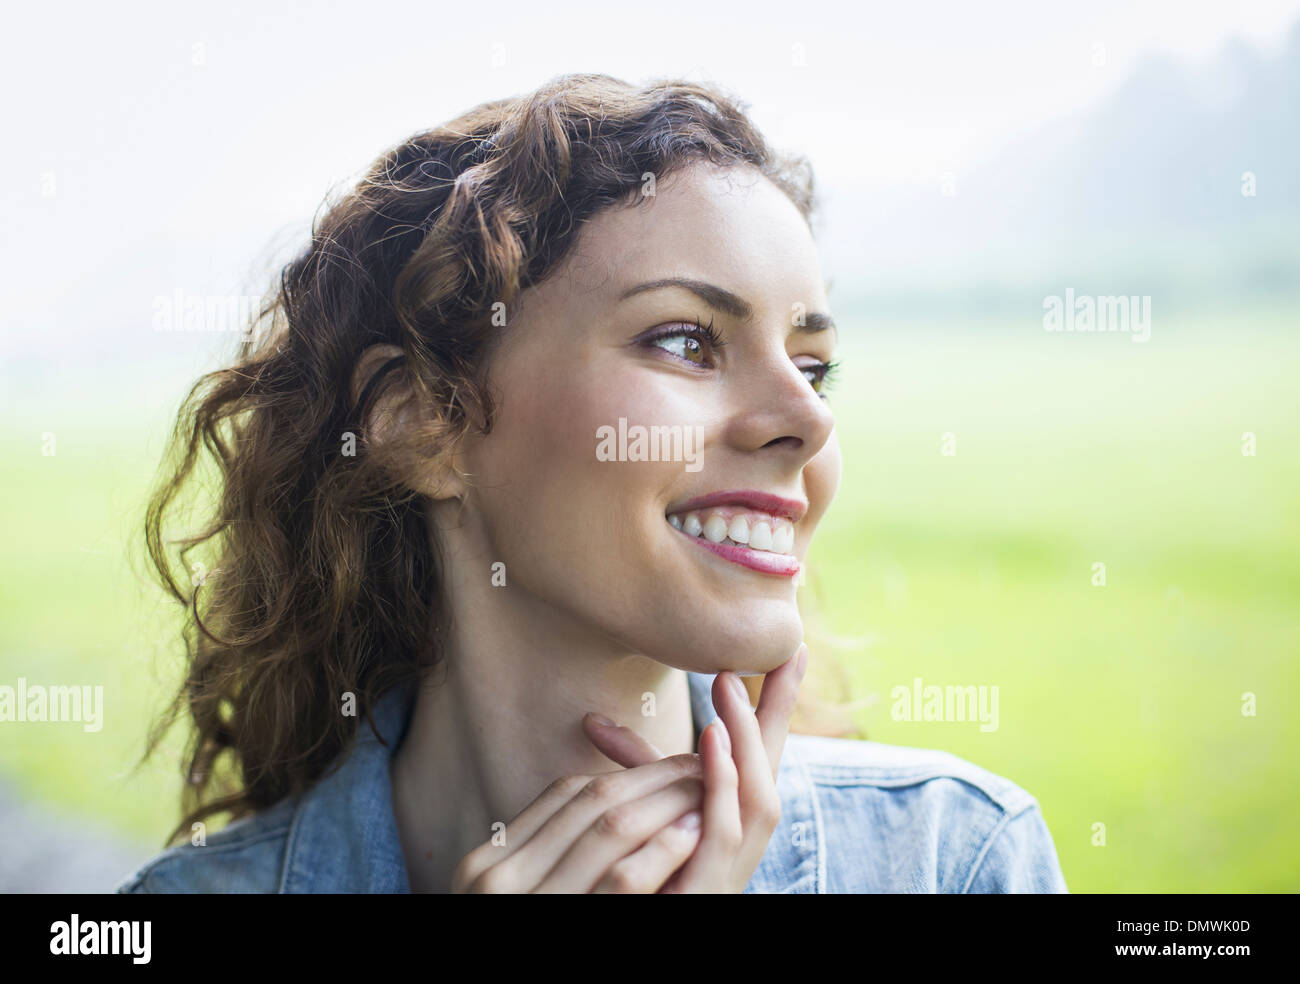 A young woman in a rural landscape with windblown curly hair. Looking away into  distance. Stock Photo